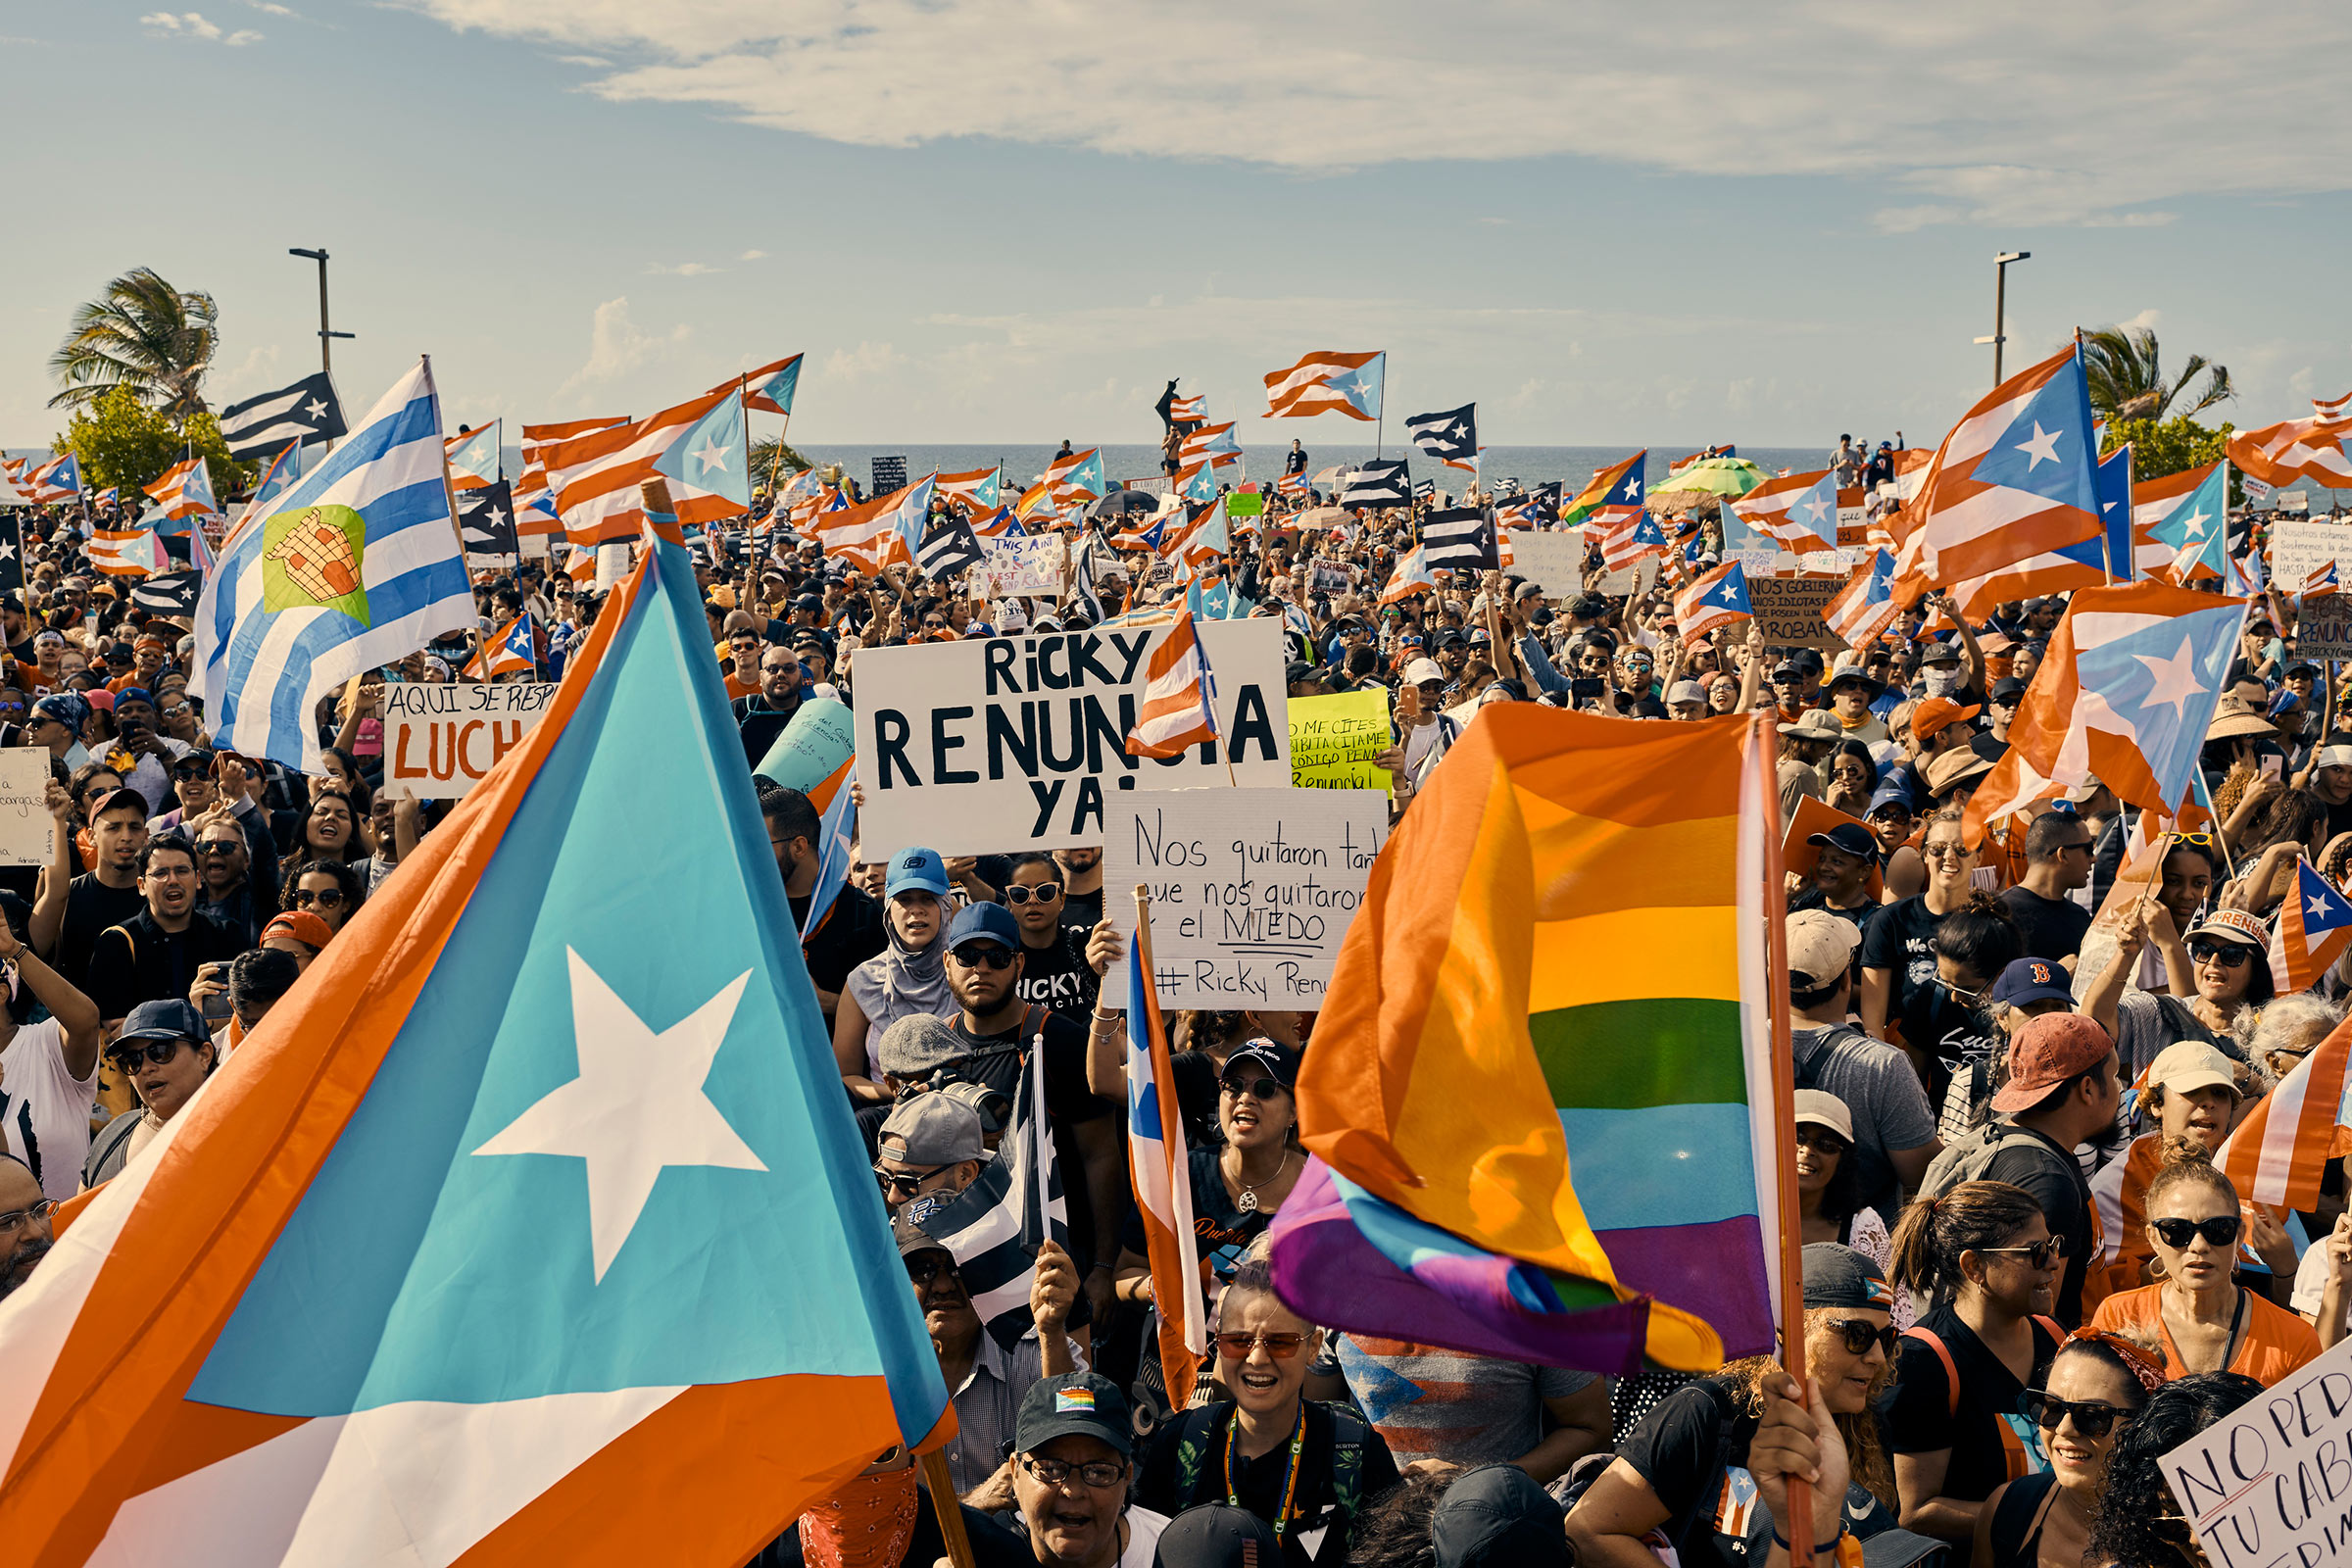 Protesters demanding Governor Ricardo Rosselló’s resignation amassed on July 17 in San Juan as the hashtag #RICKYRENUNCIA gained traction on social networks. (Christopher Gregory for TIME)